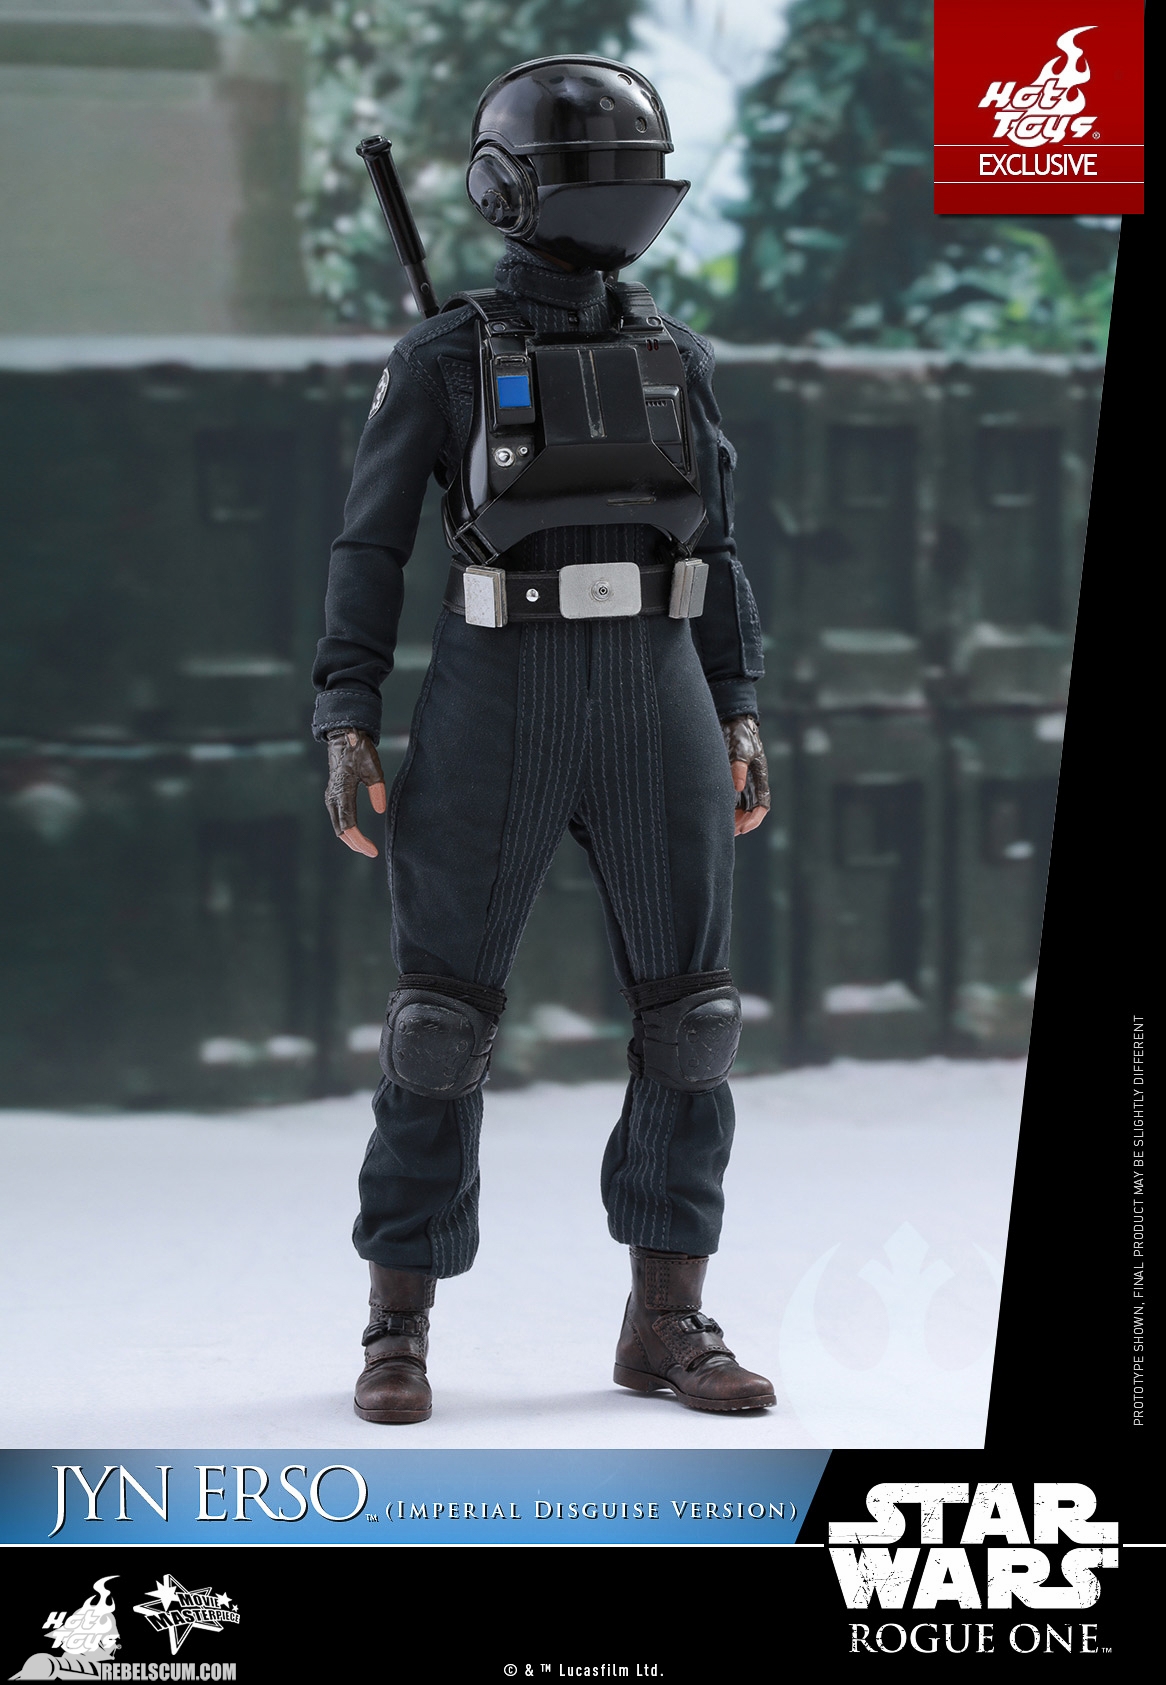 Hot-Toys-MMS419-Rogue-One-Jyn-Erso-Imperial-Disguise-017.jpg